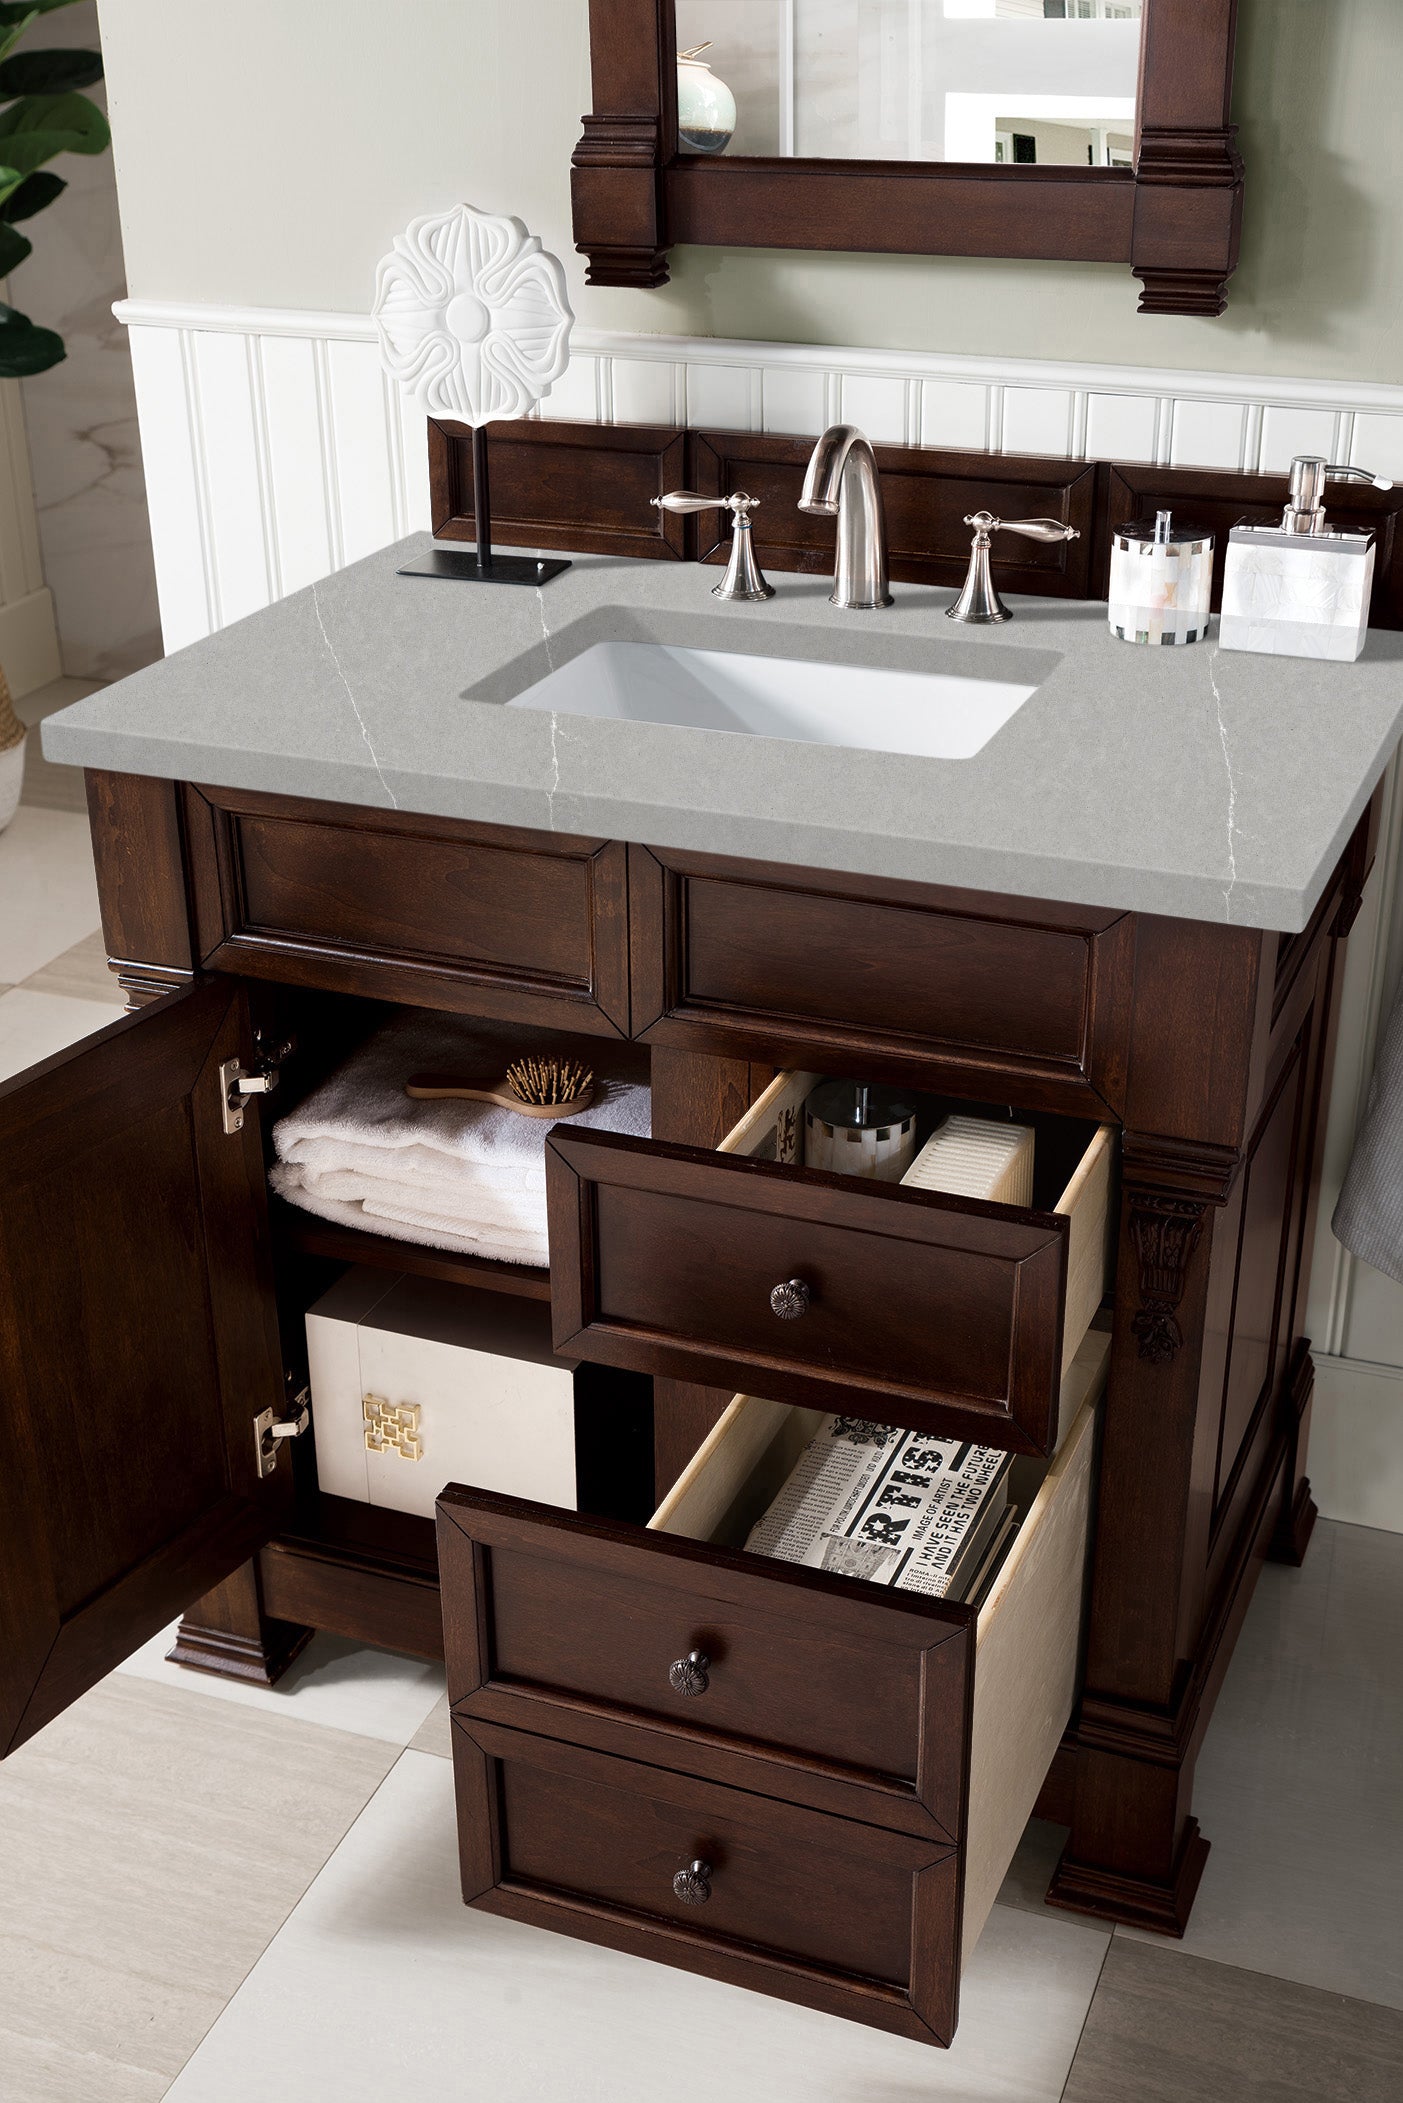 Incorporating Modern Luxury Bathroom Furniture Into Small Spaces